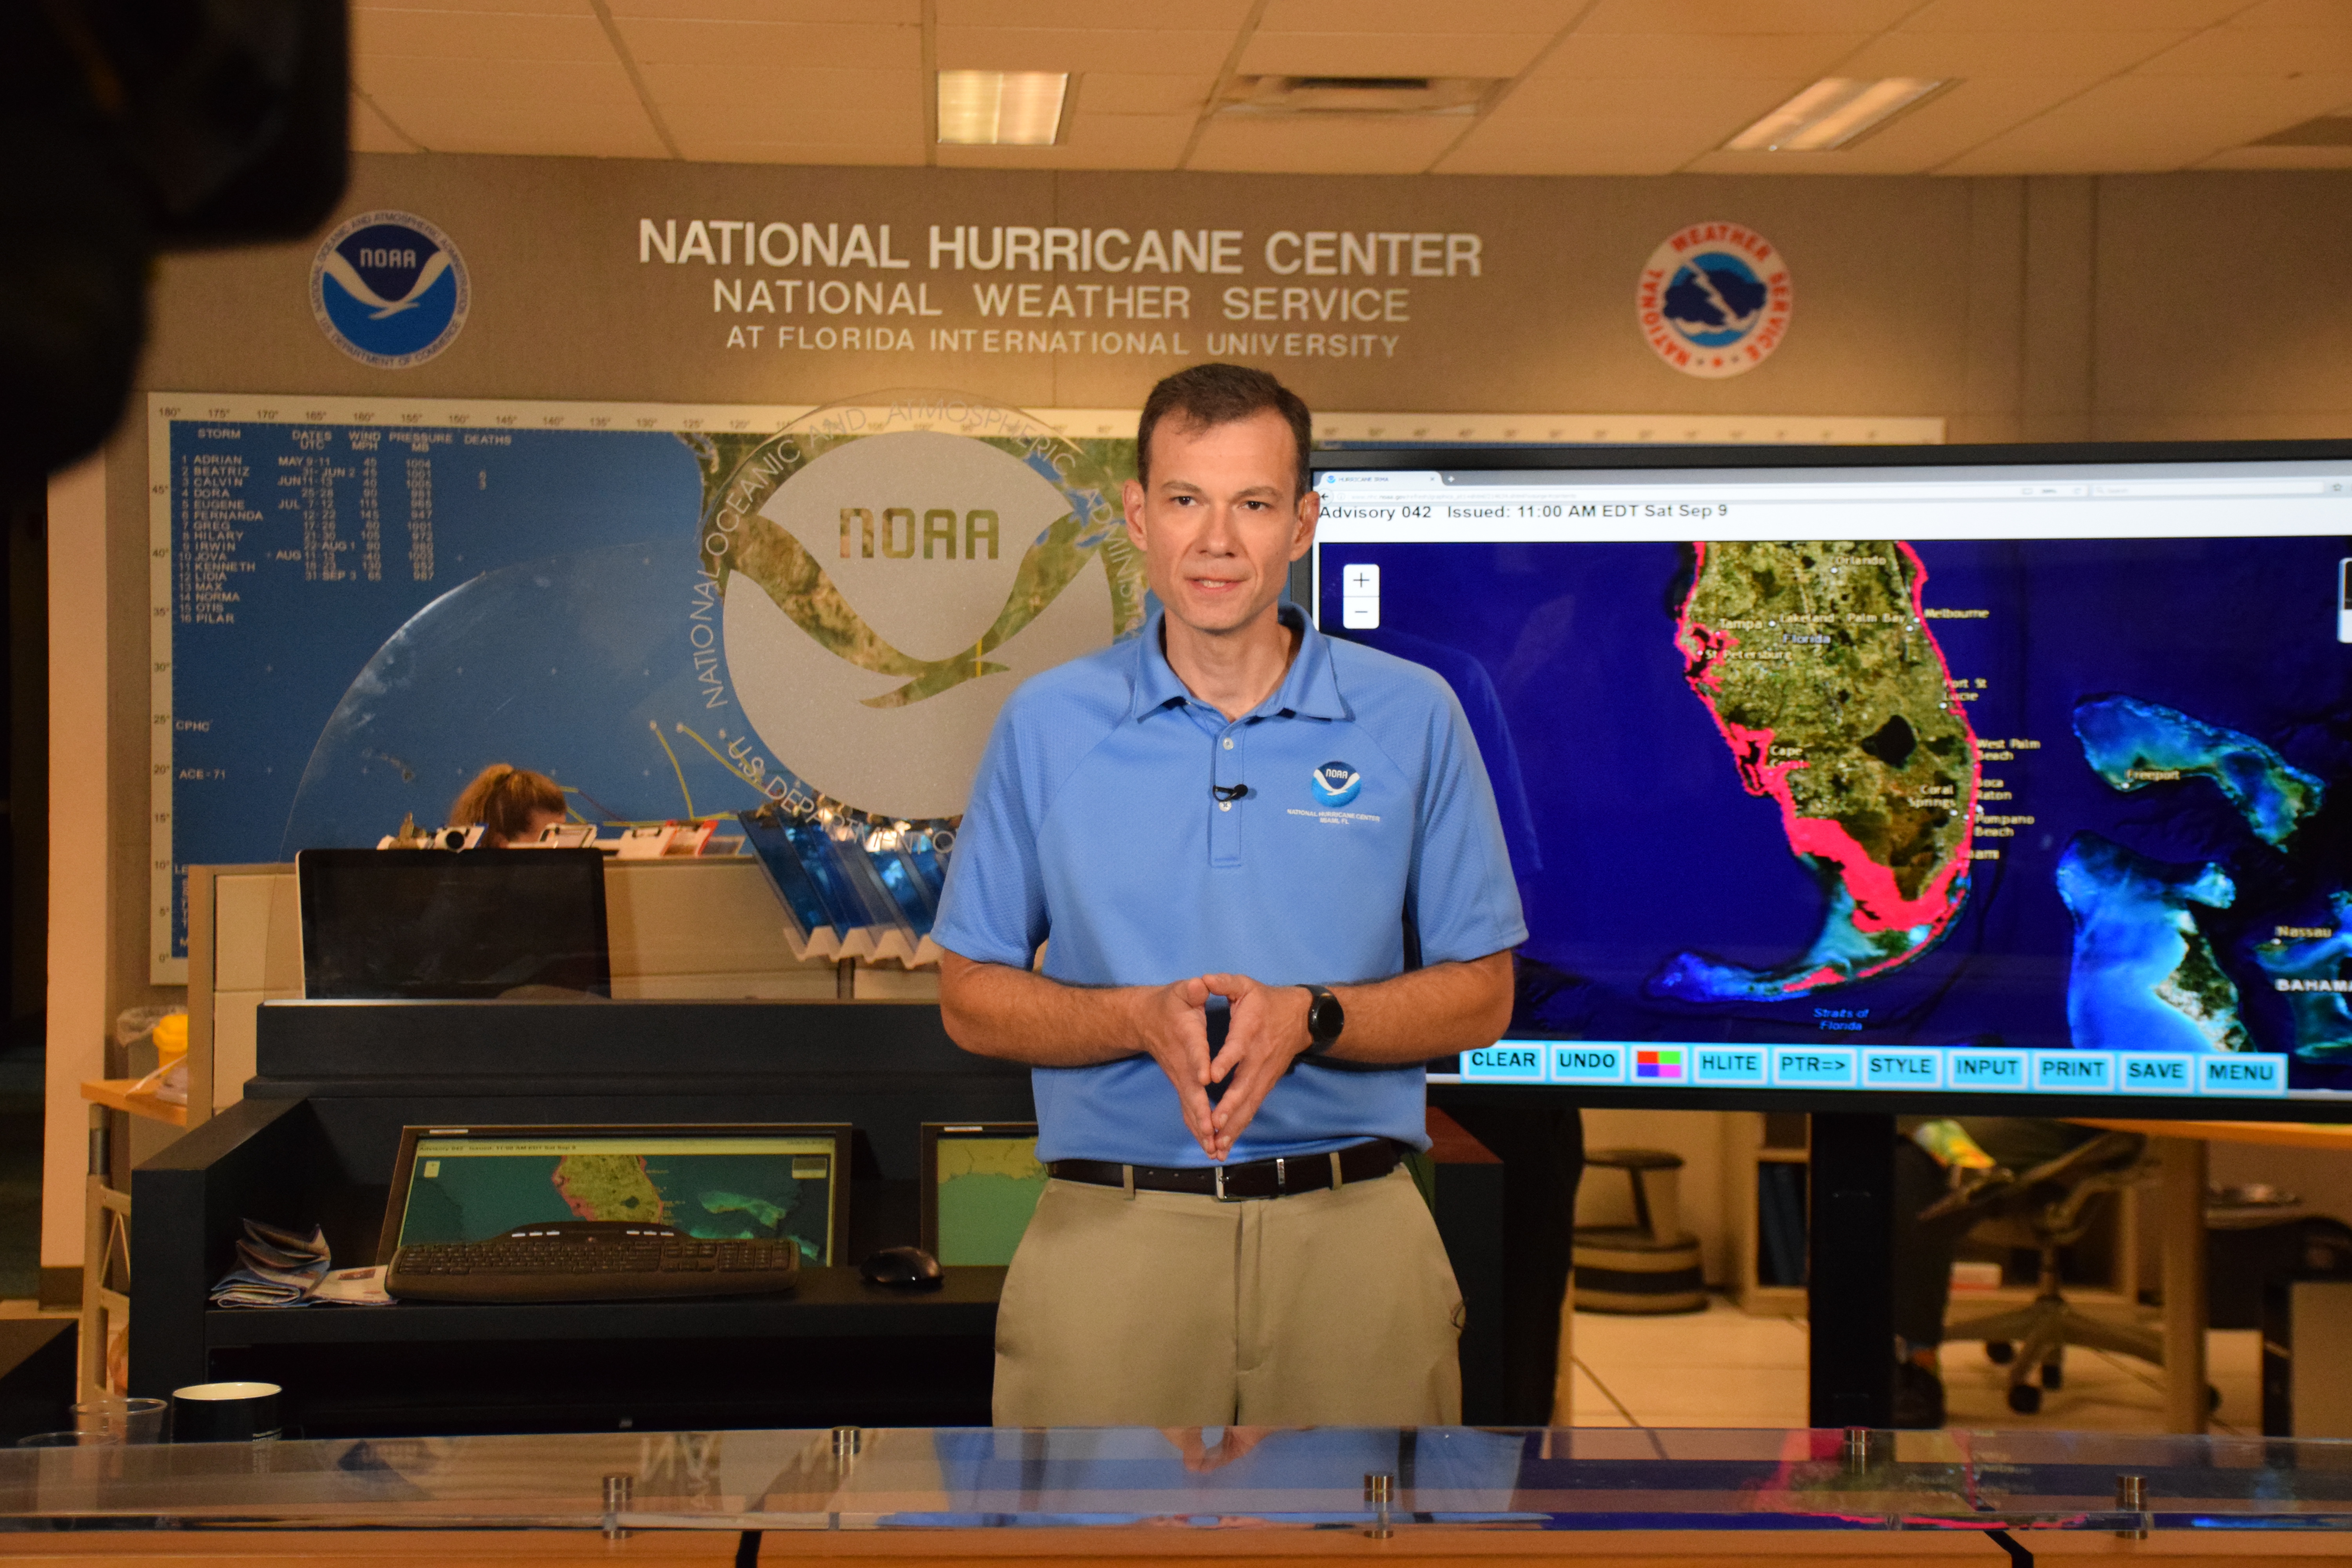 Jamie R. Rhome with NOAA’s National Hurricane Center has been awarded the prestigious 2019 Service to America medal for his pioneering work in forecasting and warning the public about the deadly and destructive inundation of water associated with a hurricane’s storm surge. Here Jamie is shown giving a television interview about Hurricane Irma, September 7, 2017.
